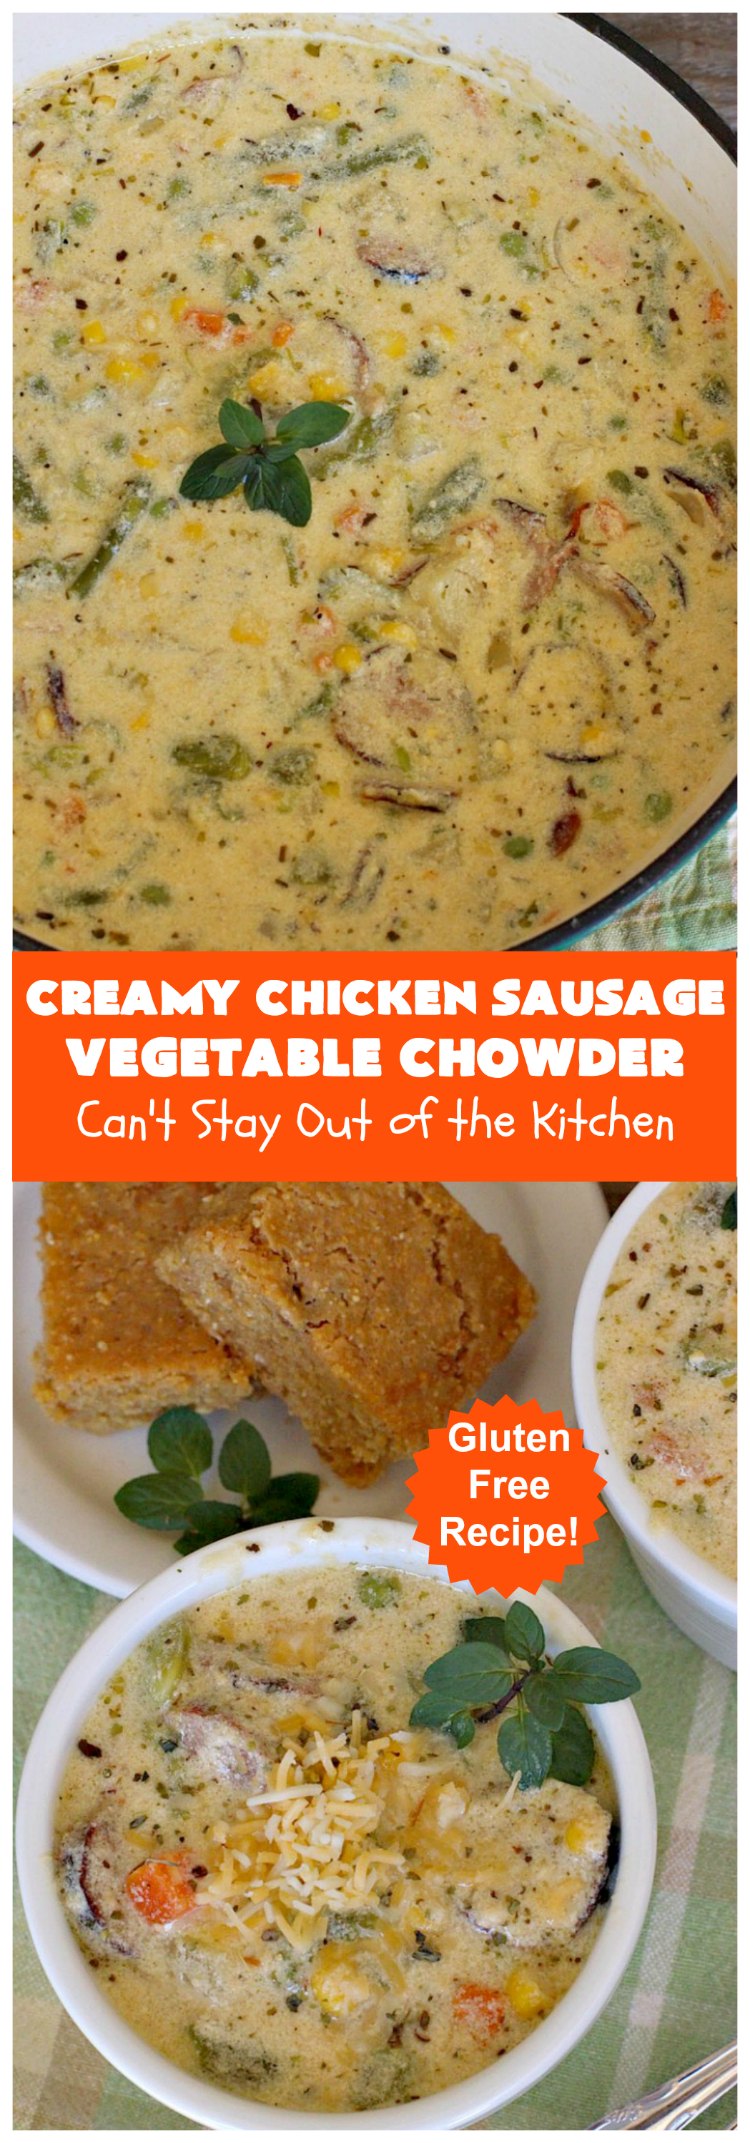 Creamy Chicken Sausage Vegetable Chowder | Can't Stay Out of the Kitchen